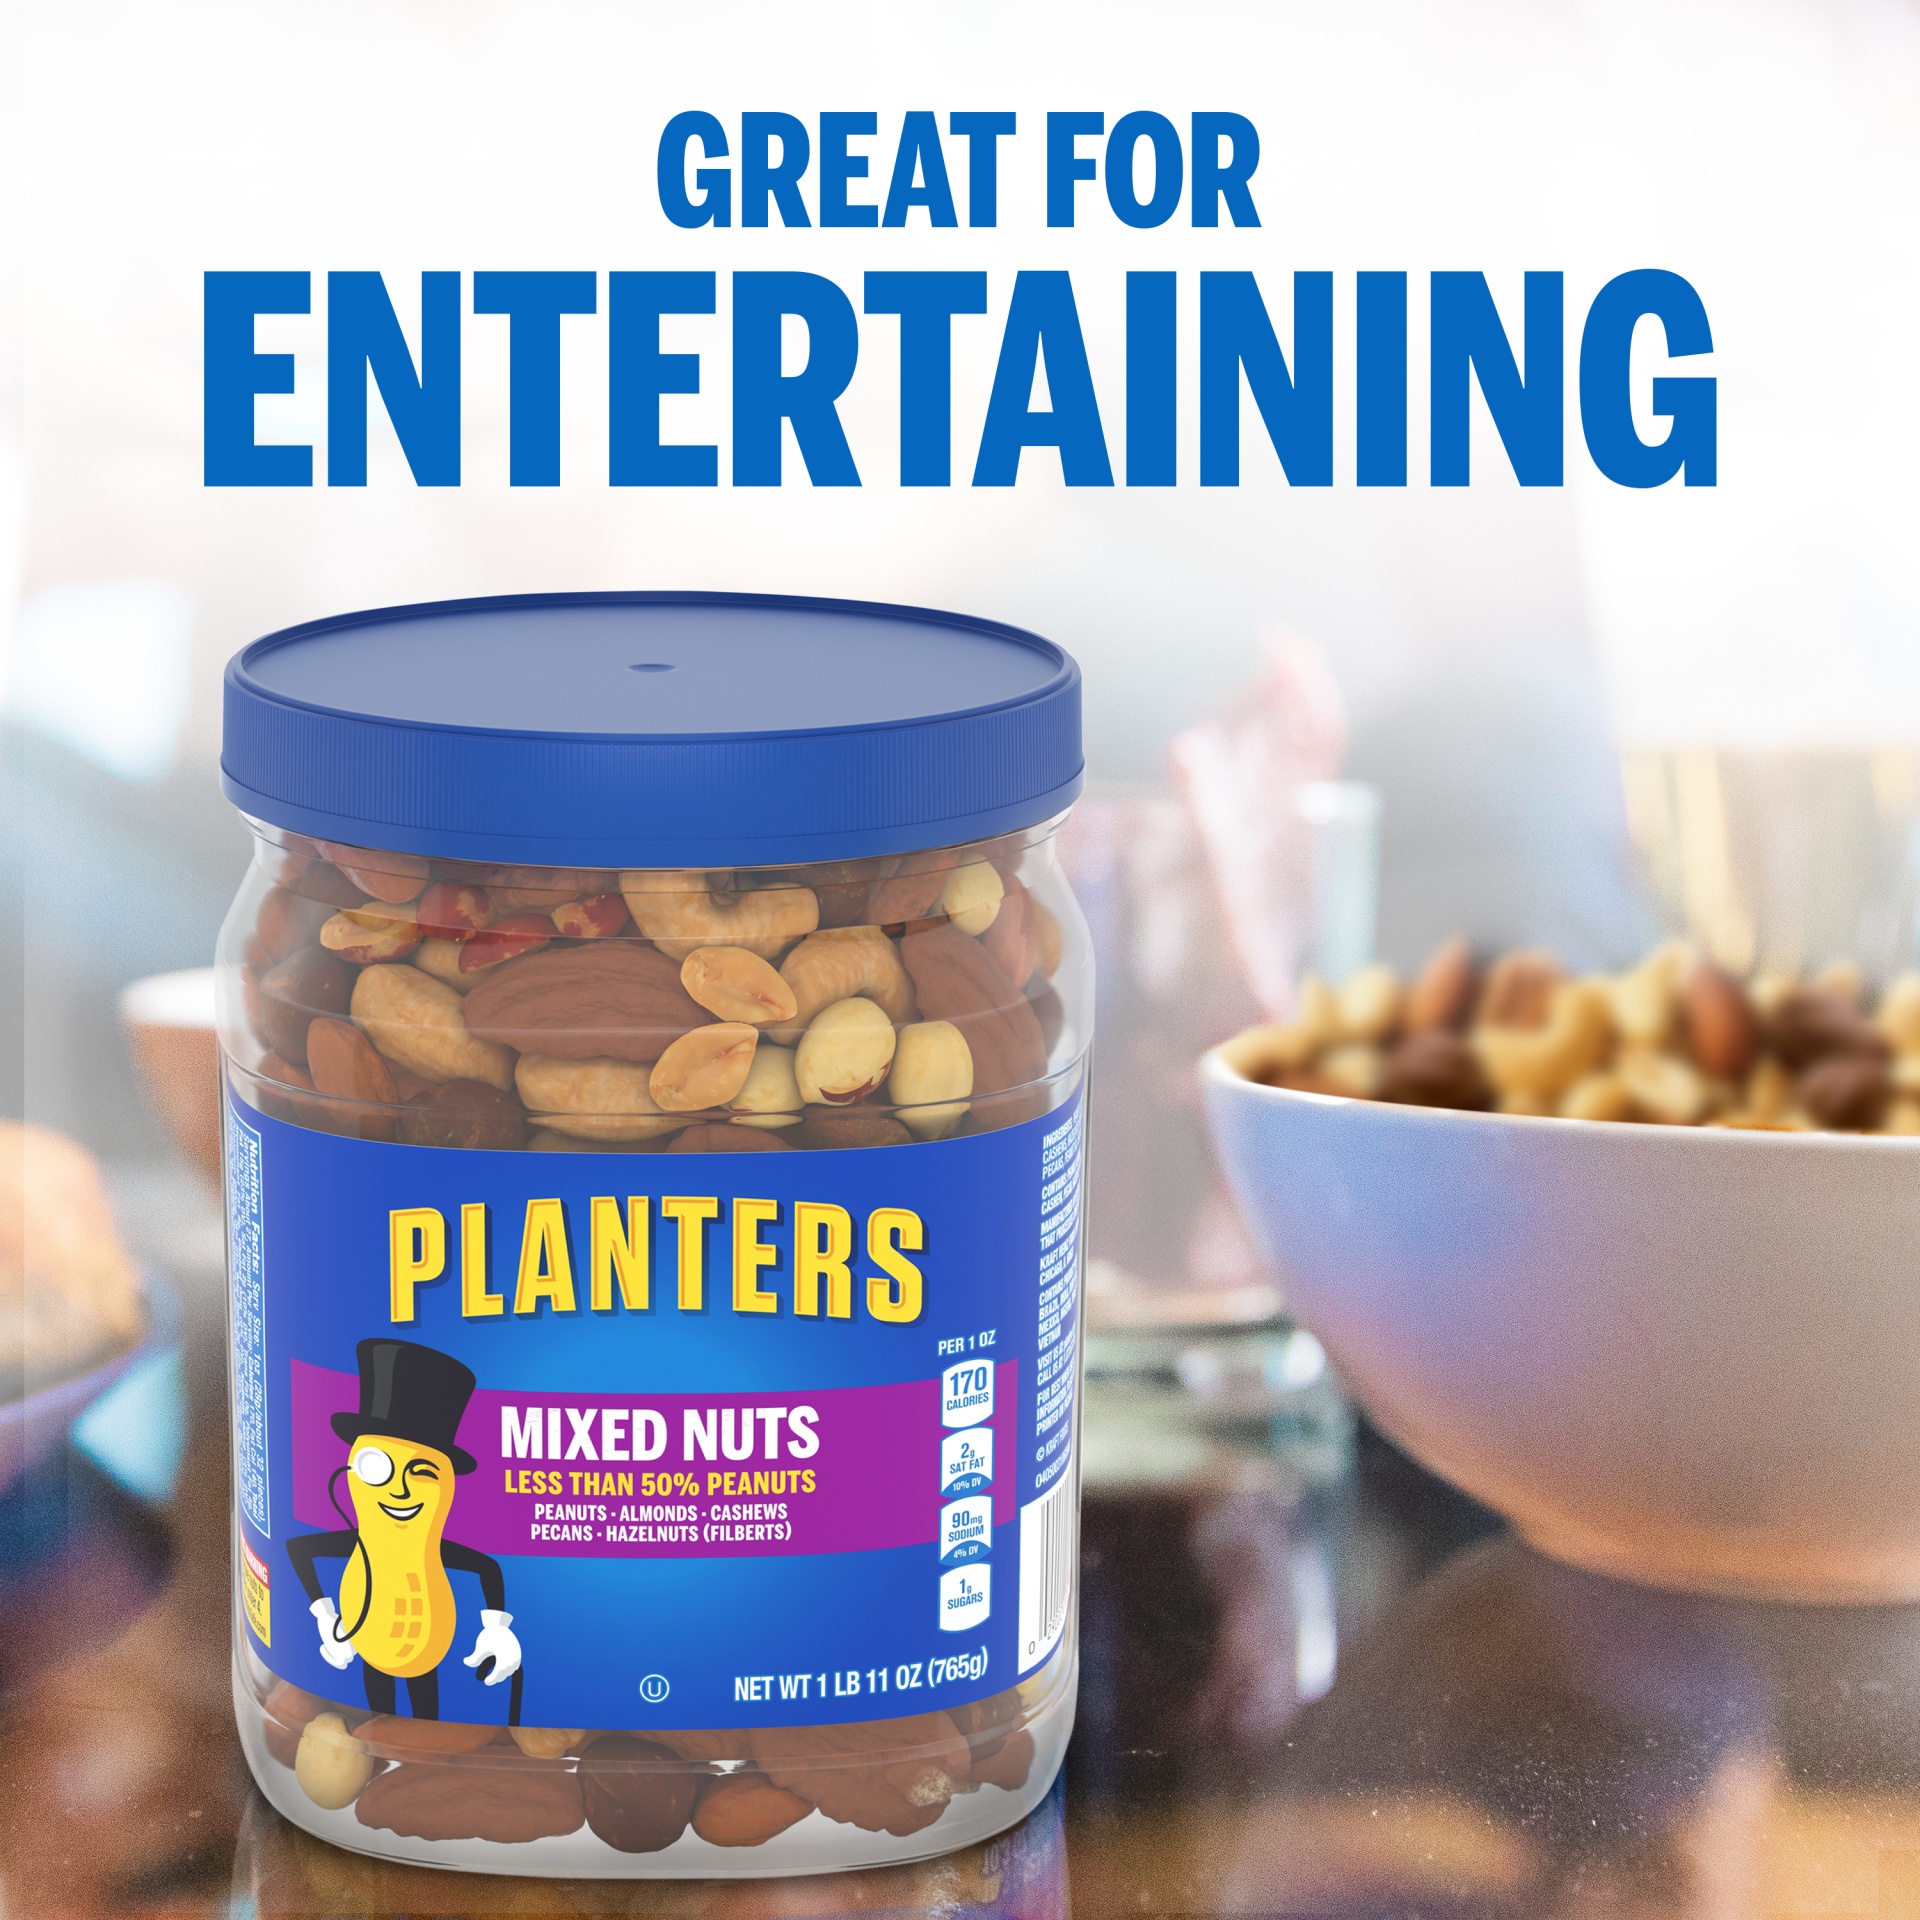 slide 3 of 14, Planters Mixed Nuts Less Than 50% Peanuts with Peanuts, Almonds, Cashews, Pecans & Hazelnuts, 27 oz